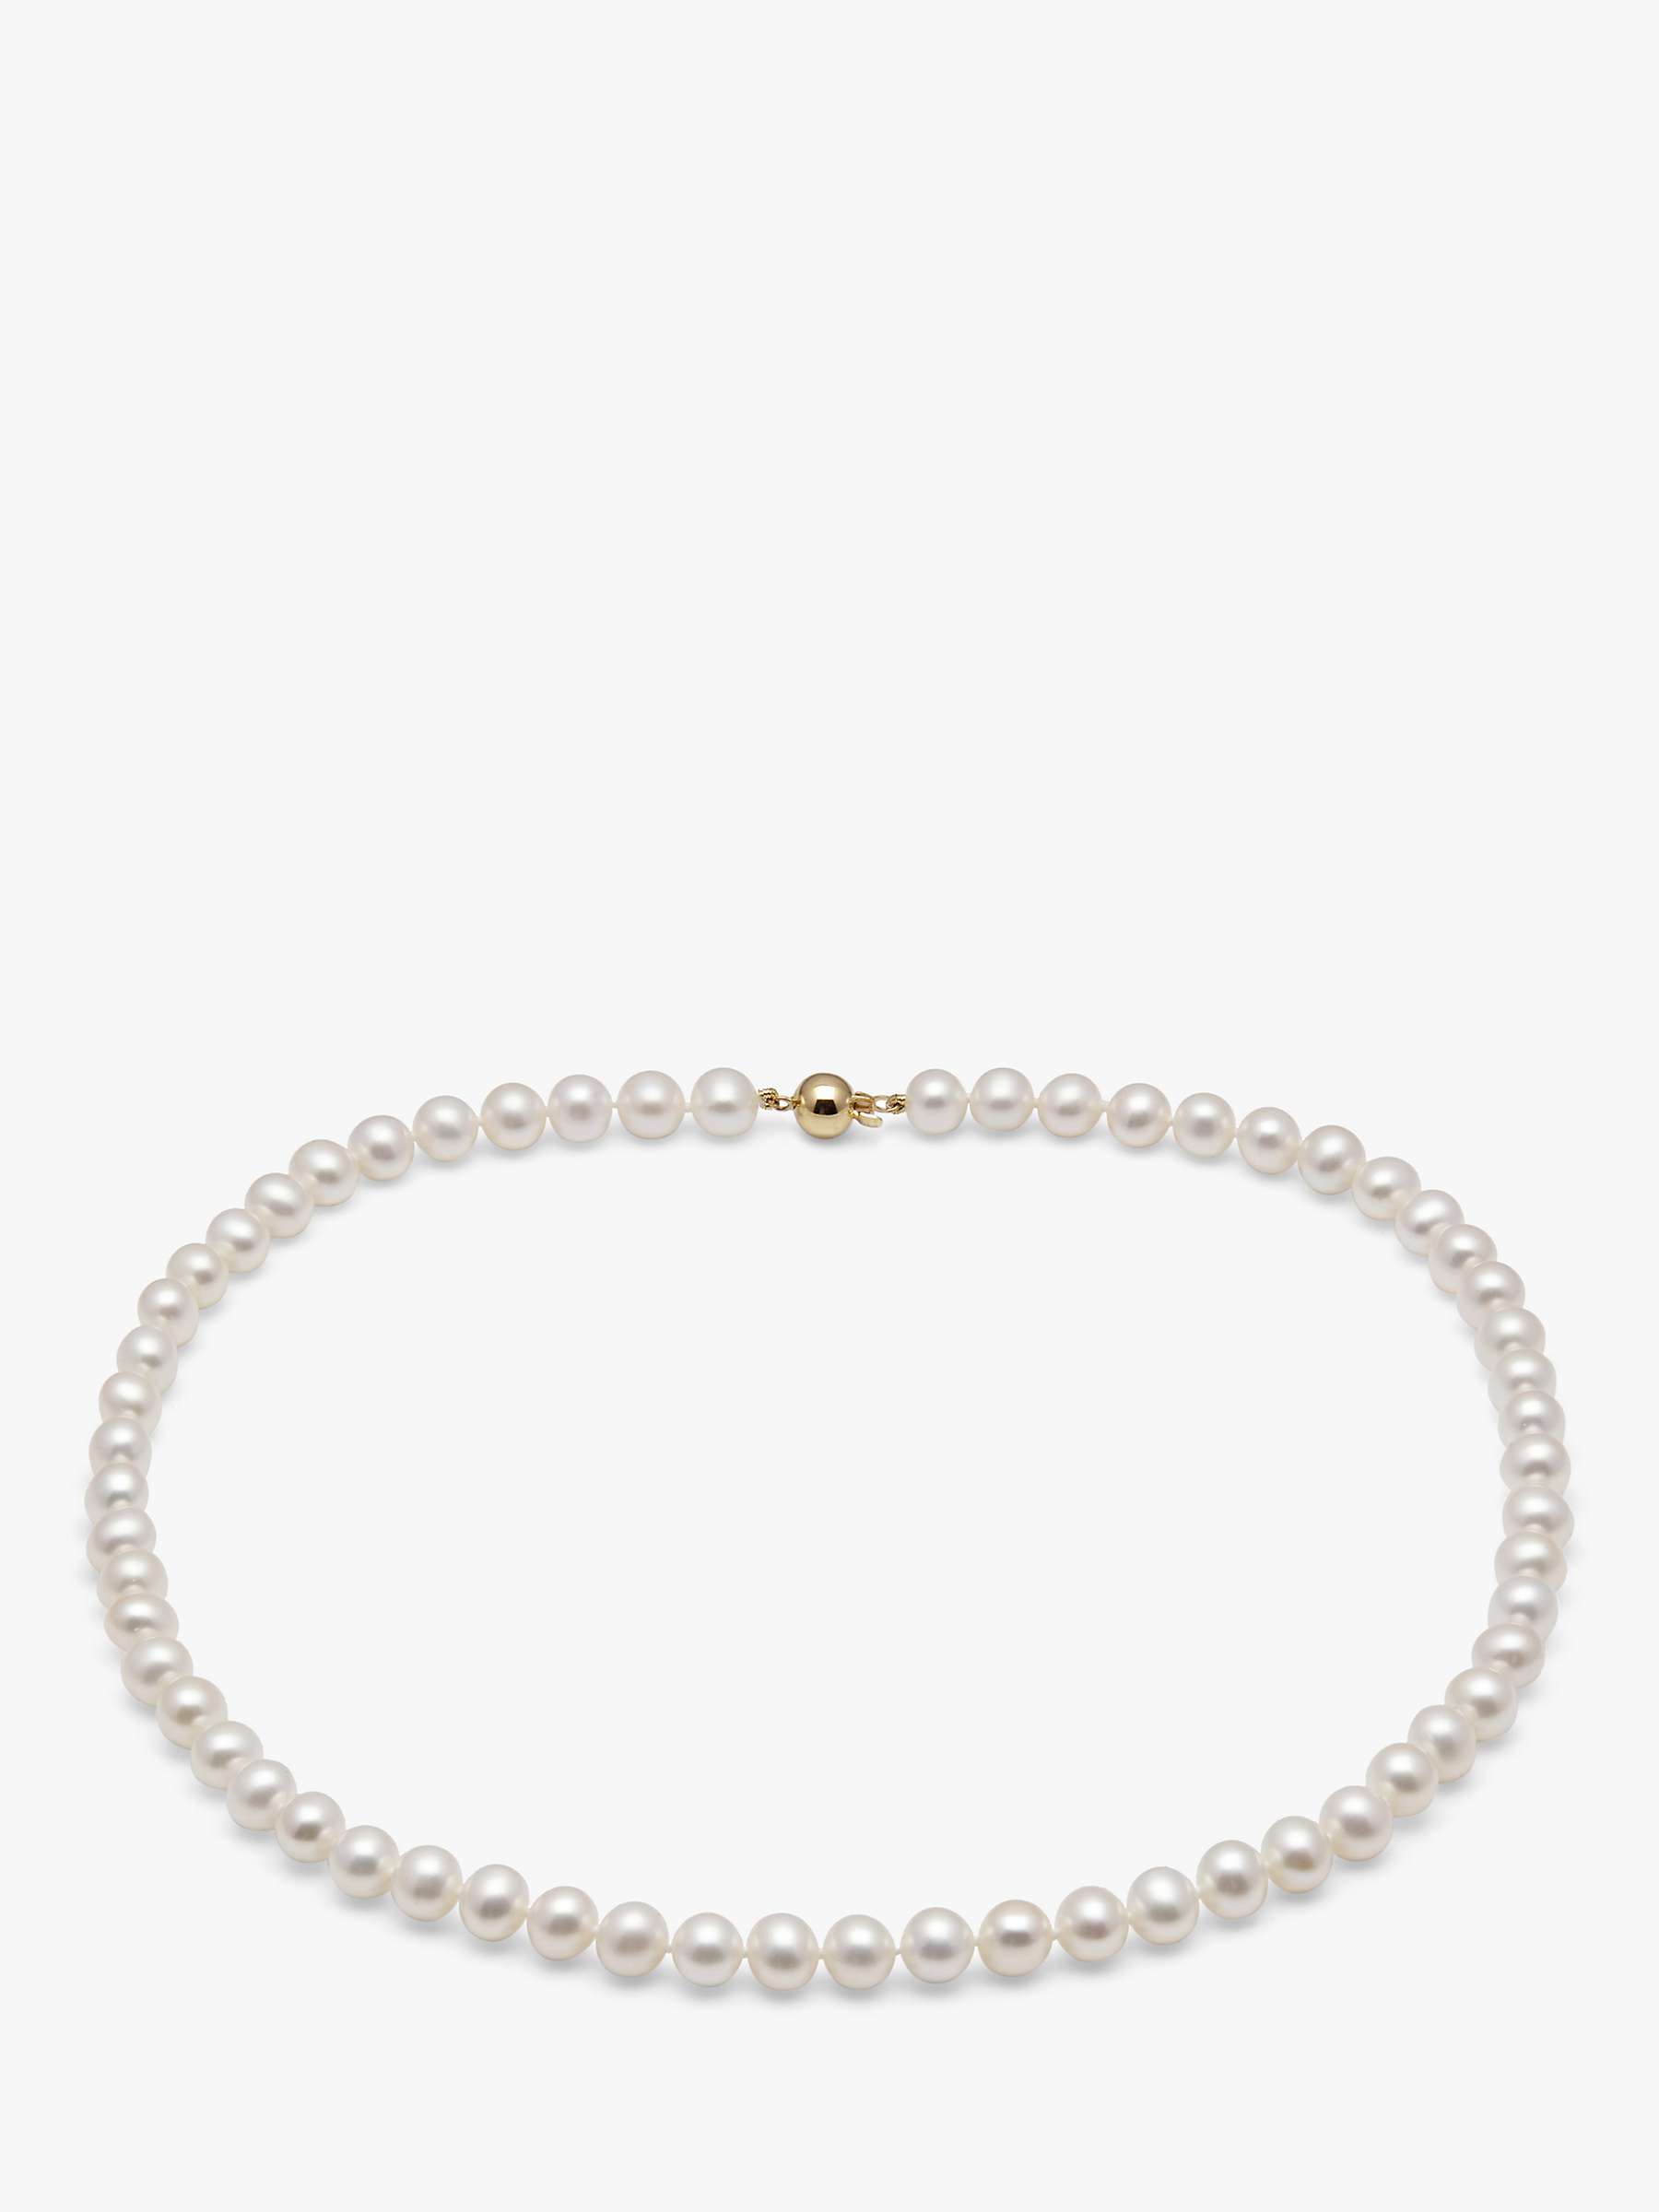 Buy A B Davis 9ct Yellow Gold Freshwater Pearl Necklace, White Online at johnlewis.com